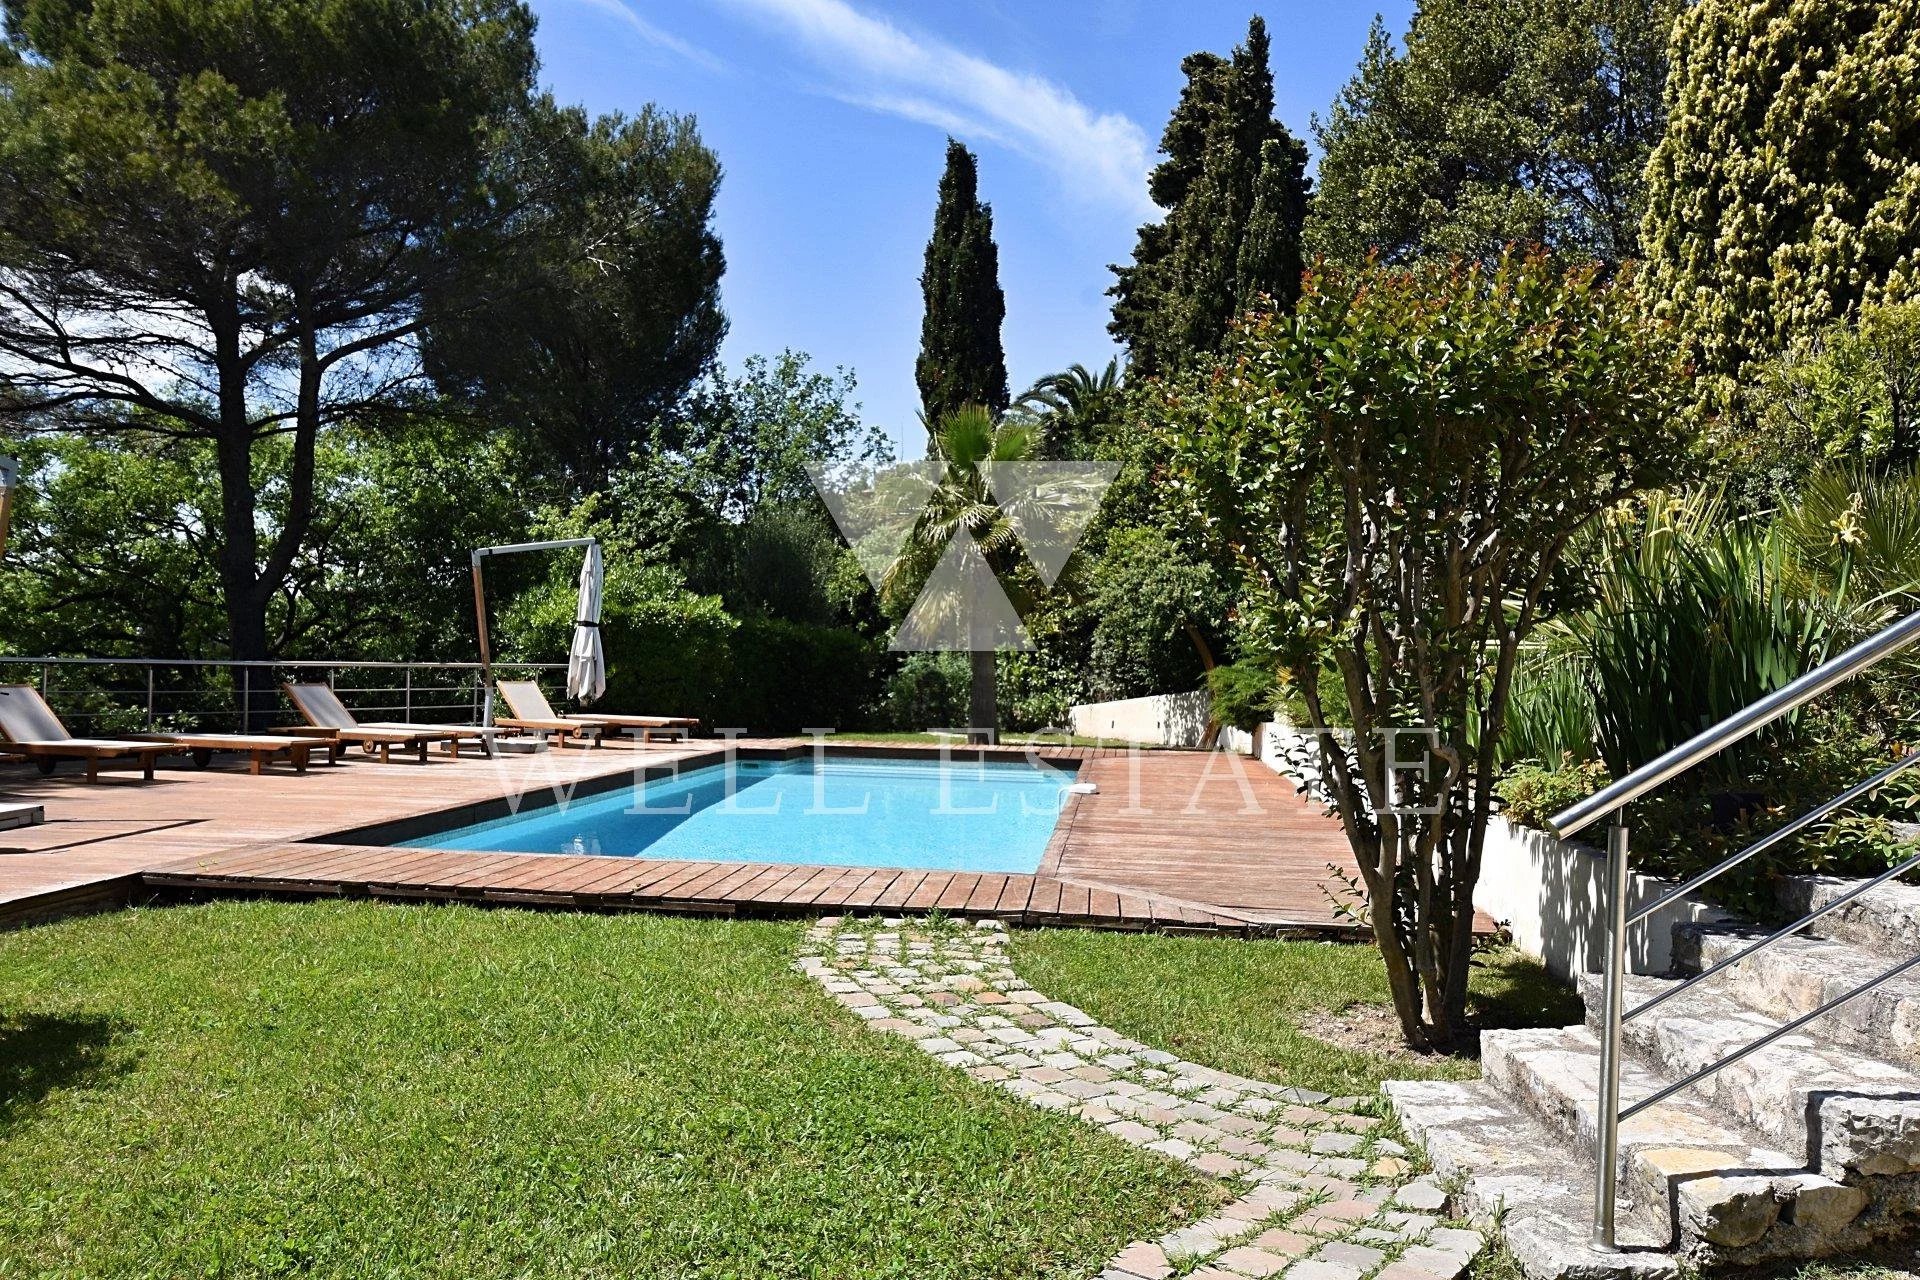 SUPER CANNES VILLA 270M2 8 ROOMS HEATED SWIMMING POOL SEA VIEW